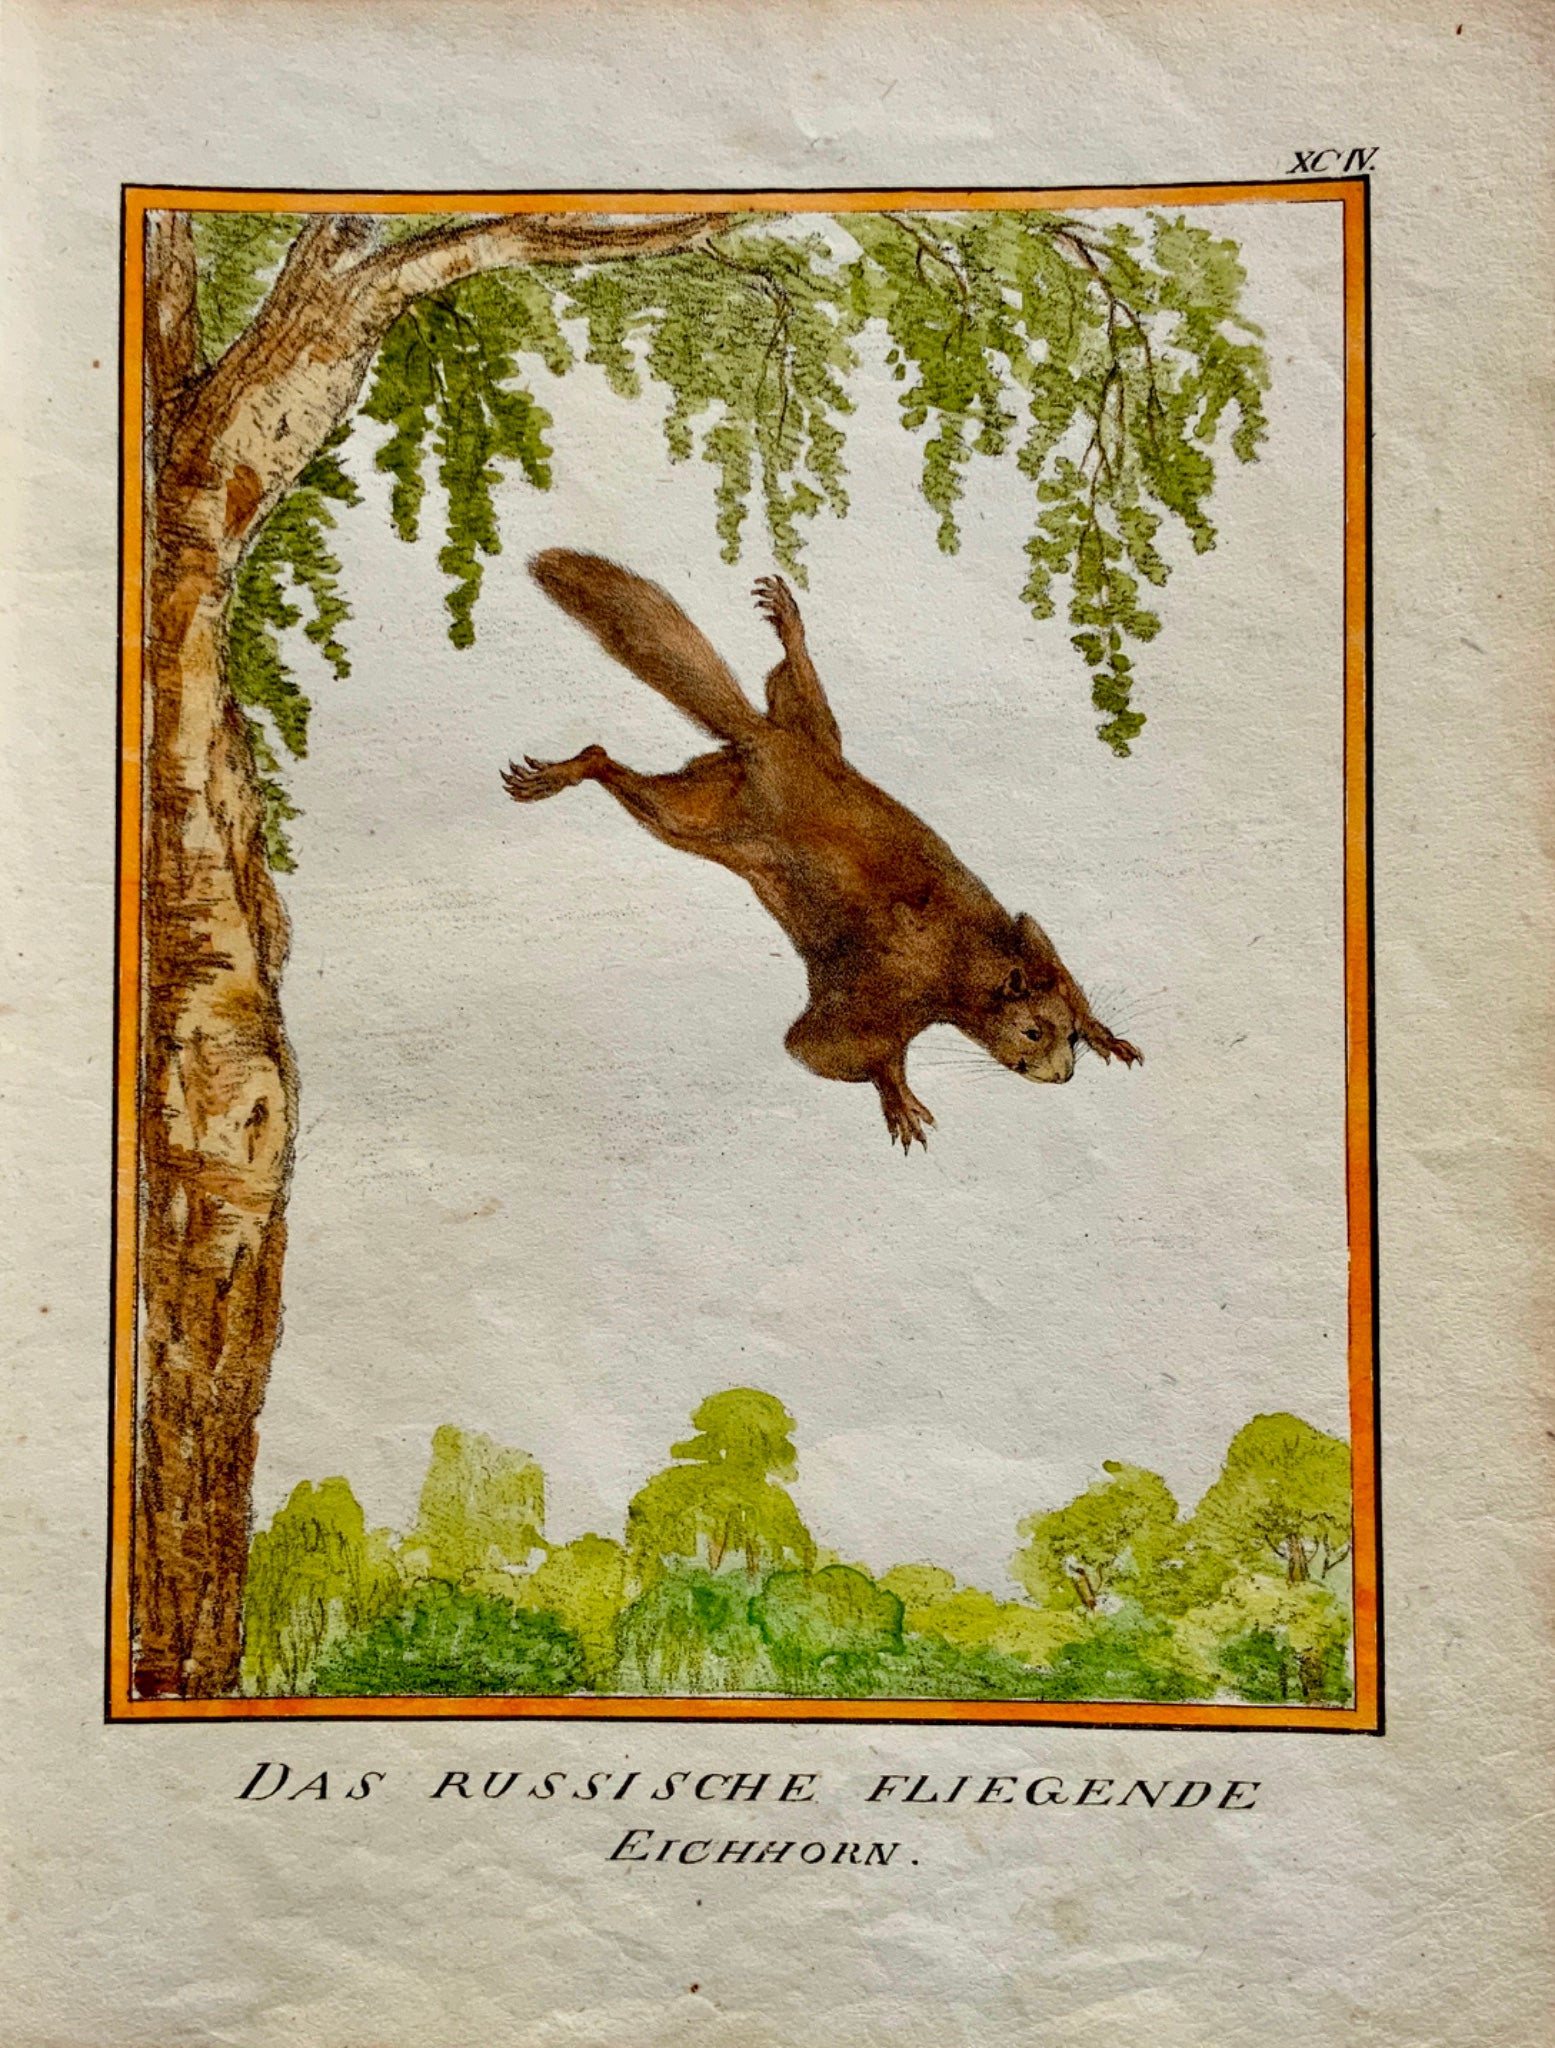 1816 Russian Flying Squirrel INCUNABULA LITHOGRAPHY Schmidt 4to hand coloured - Mammal